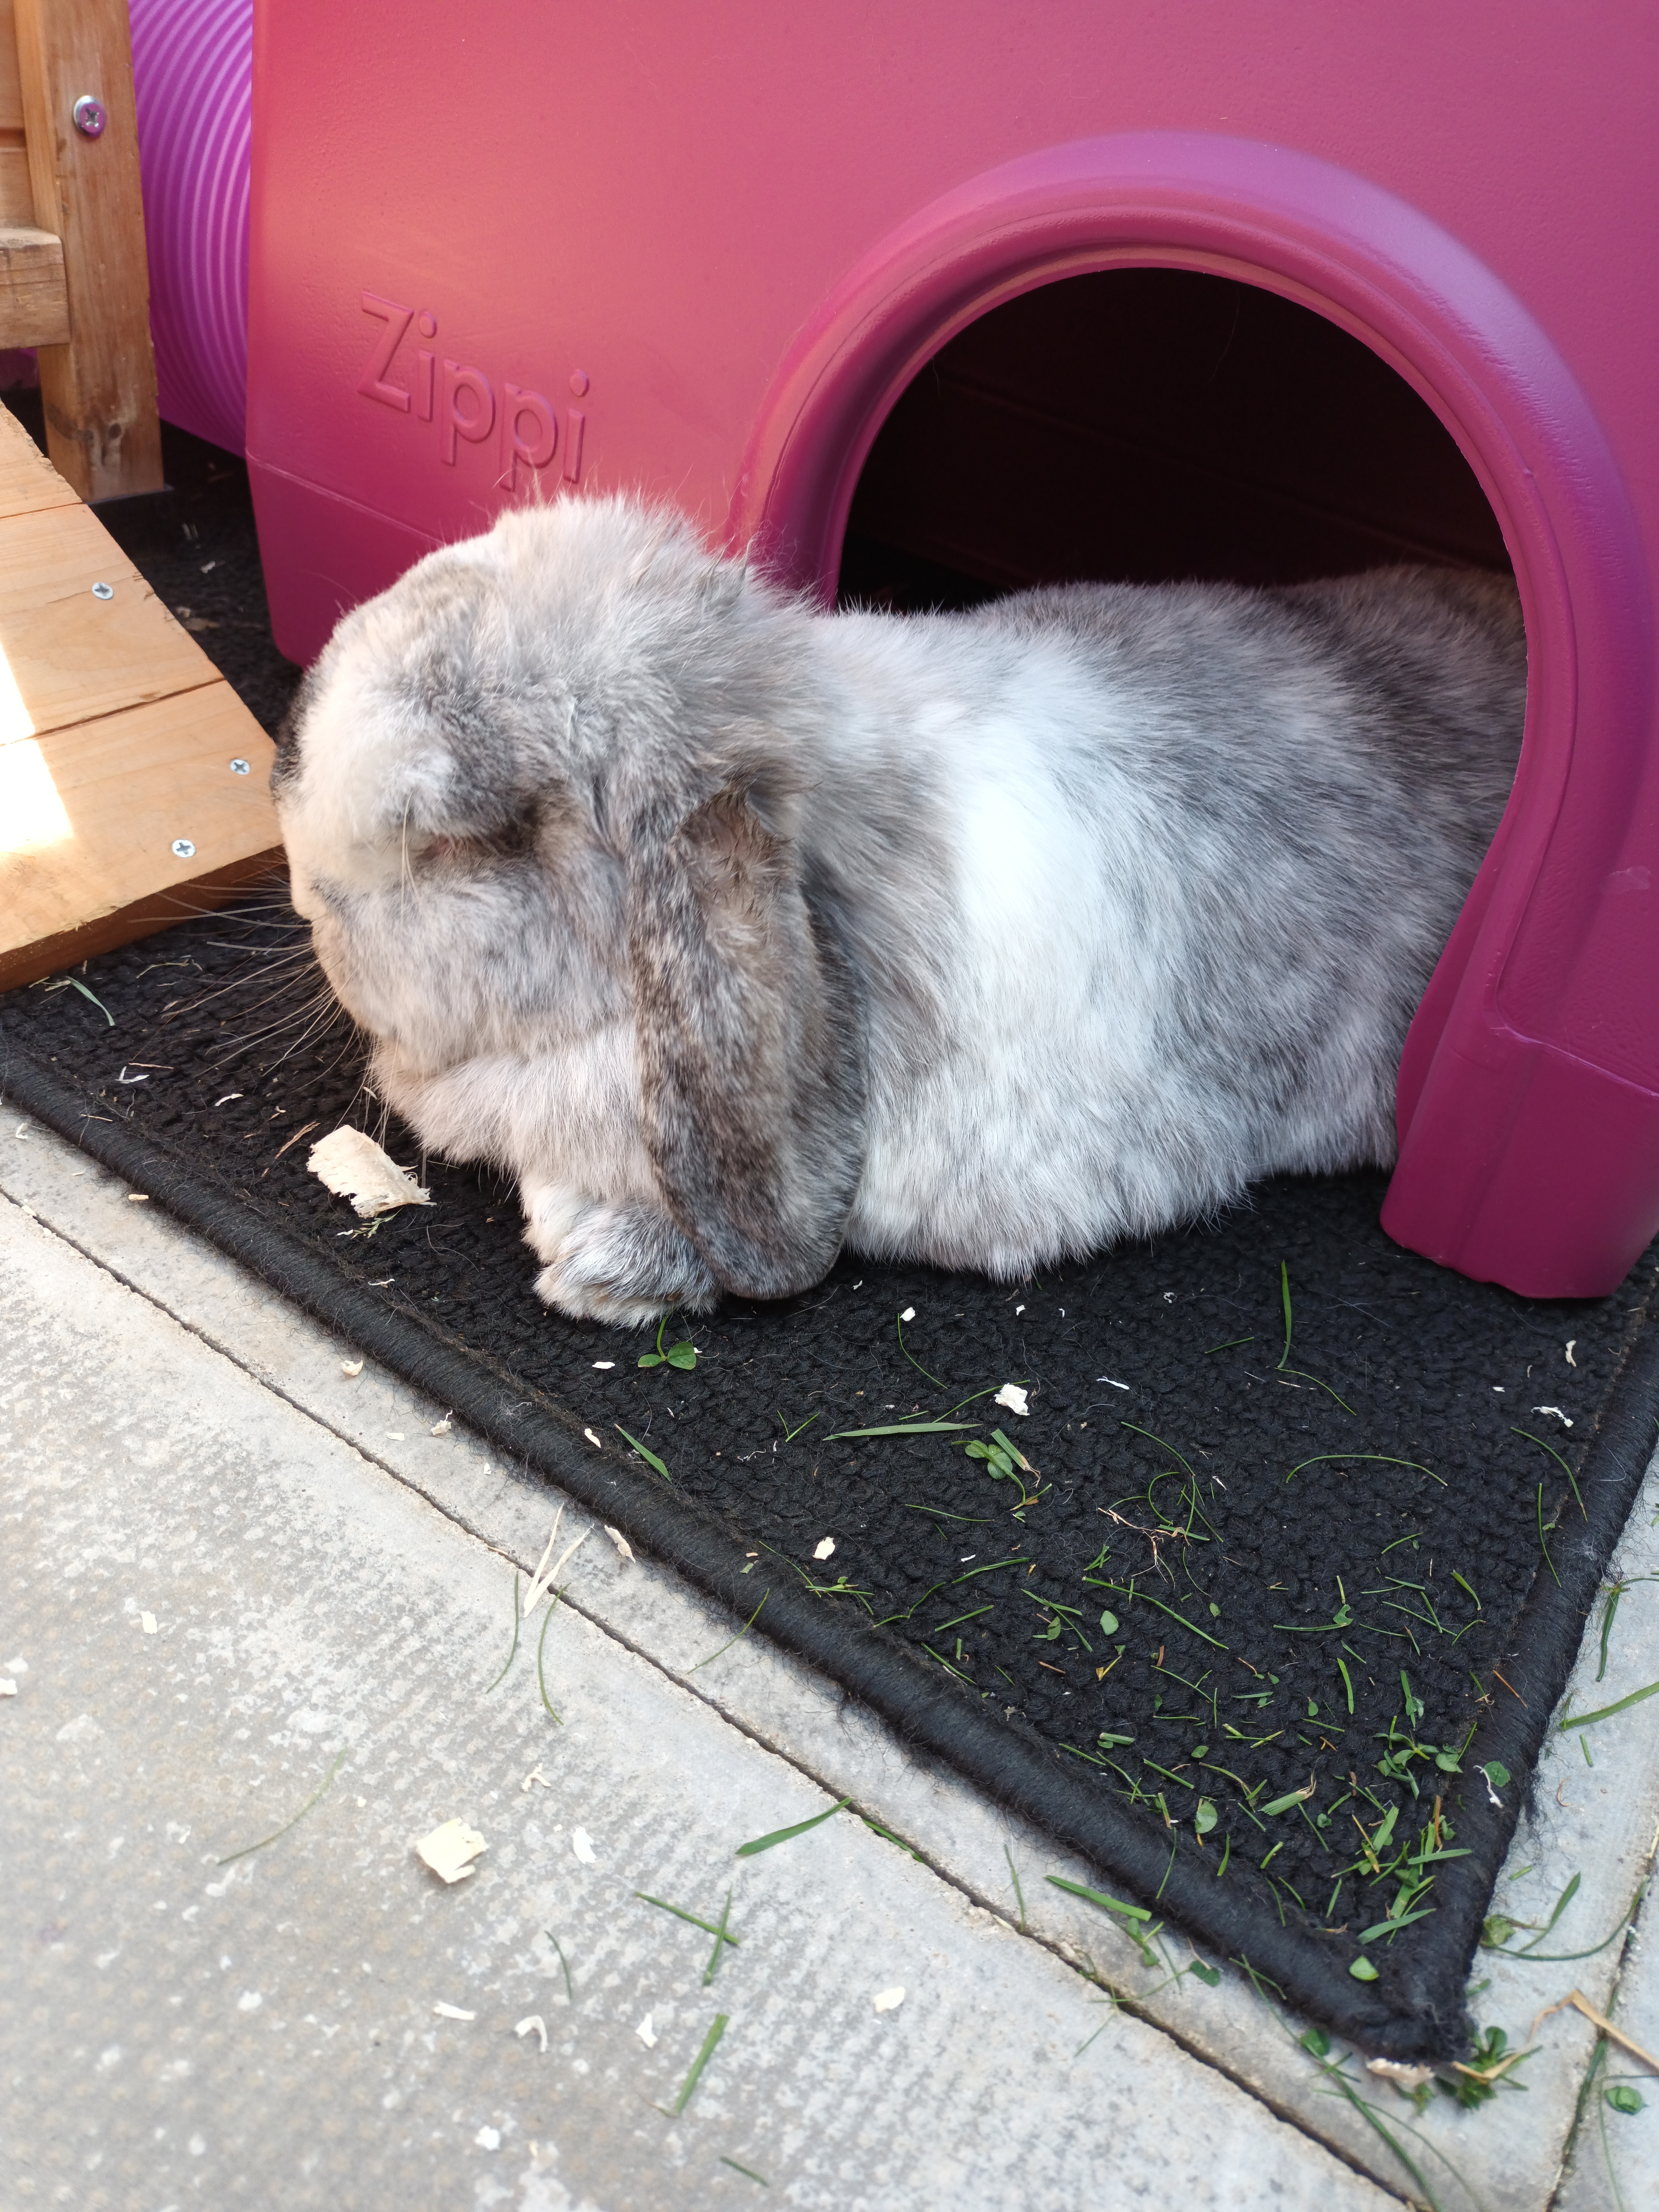 A rabbit eating a treat, sat in his pink shelter